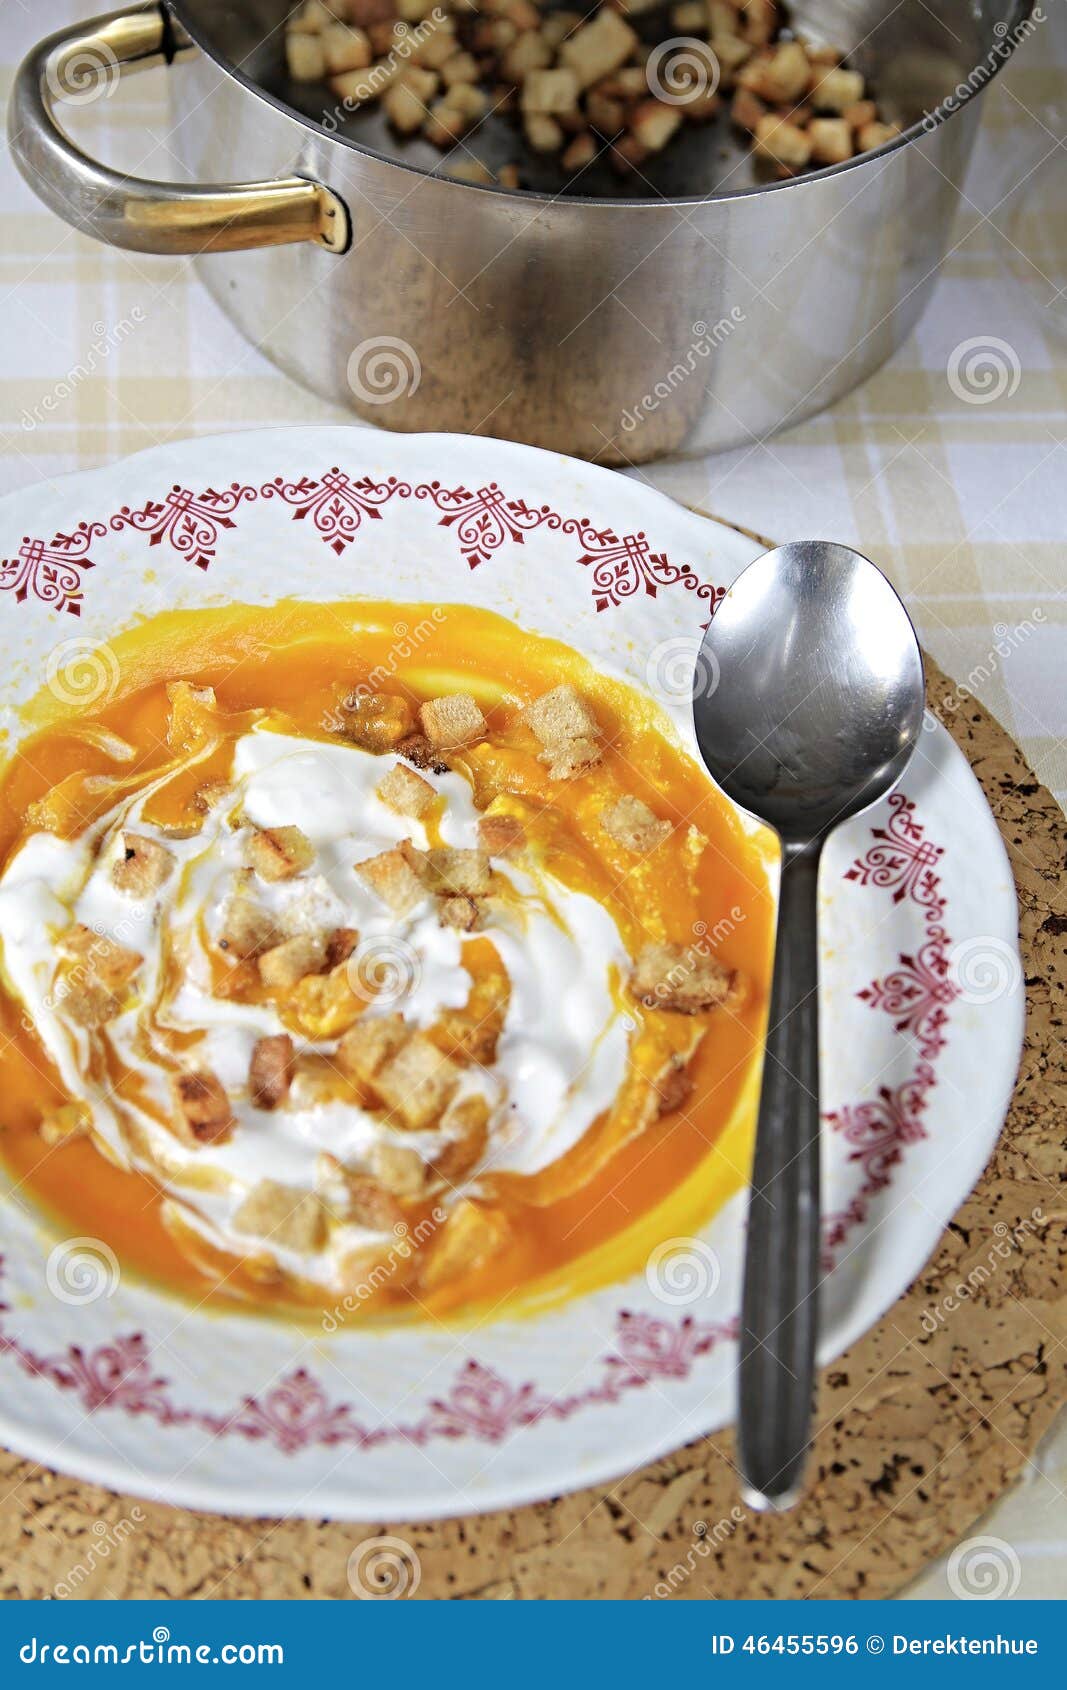 Image of a plate of pumpkin soup on a table